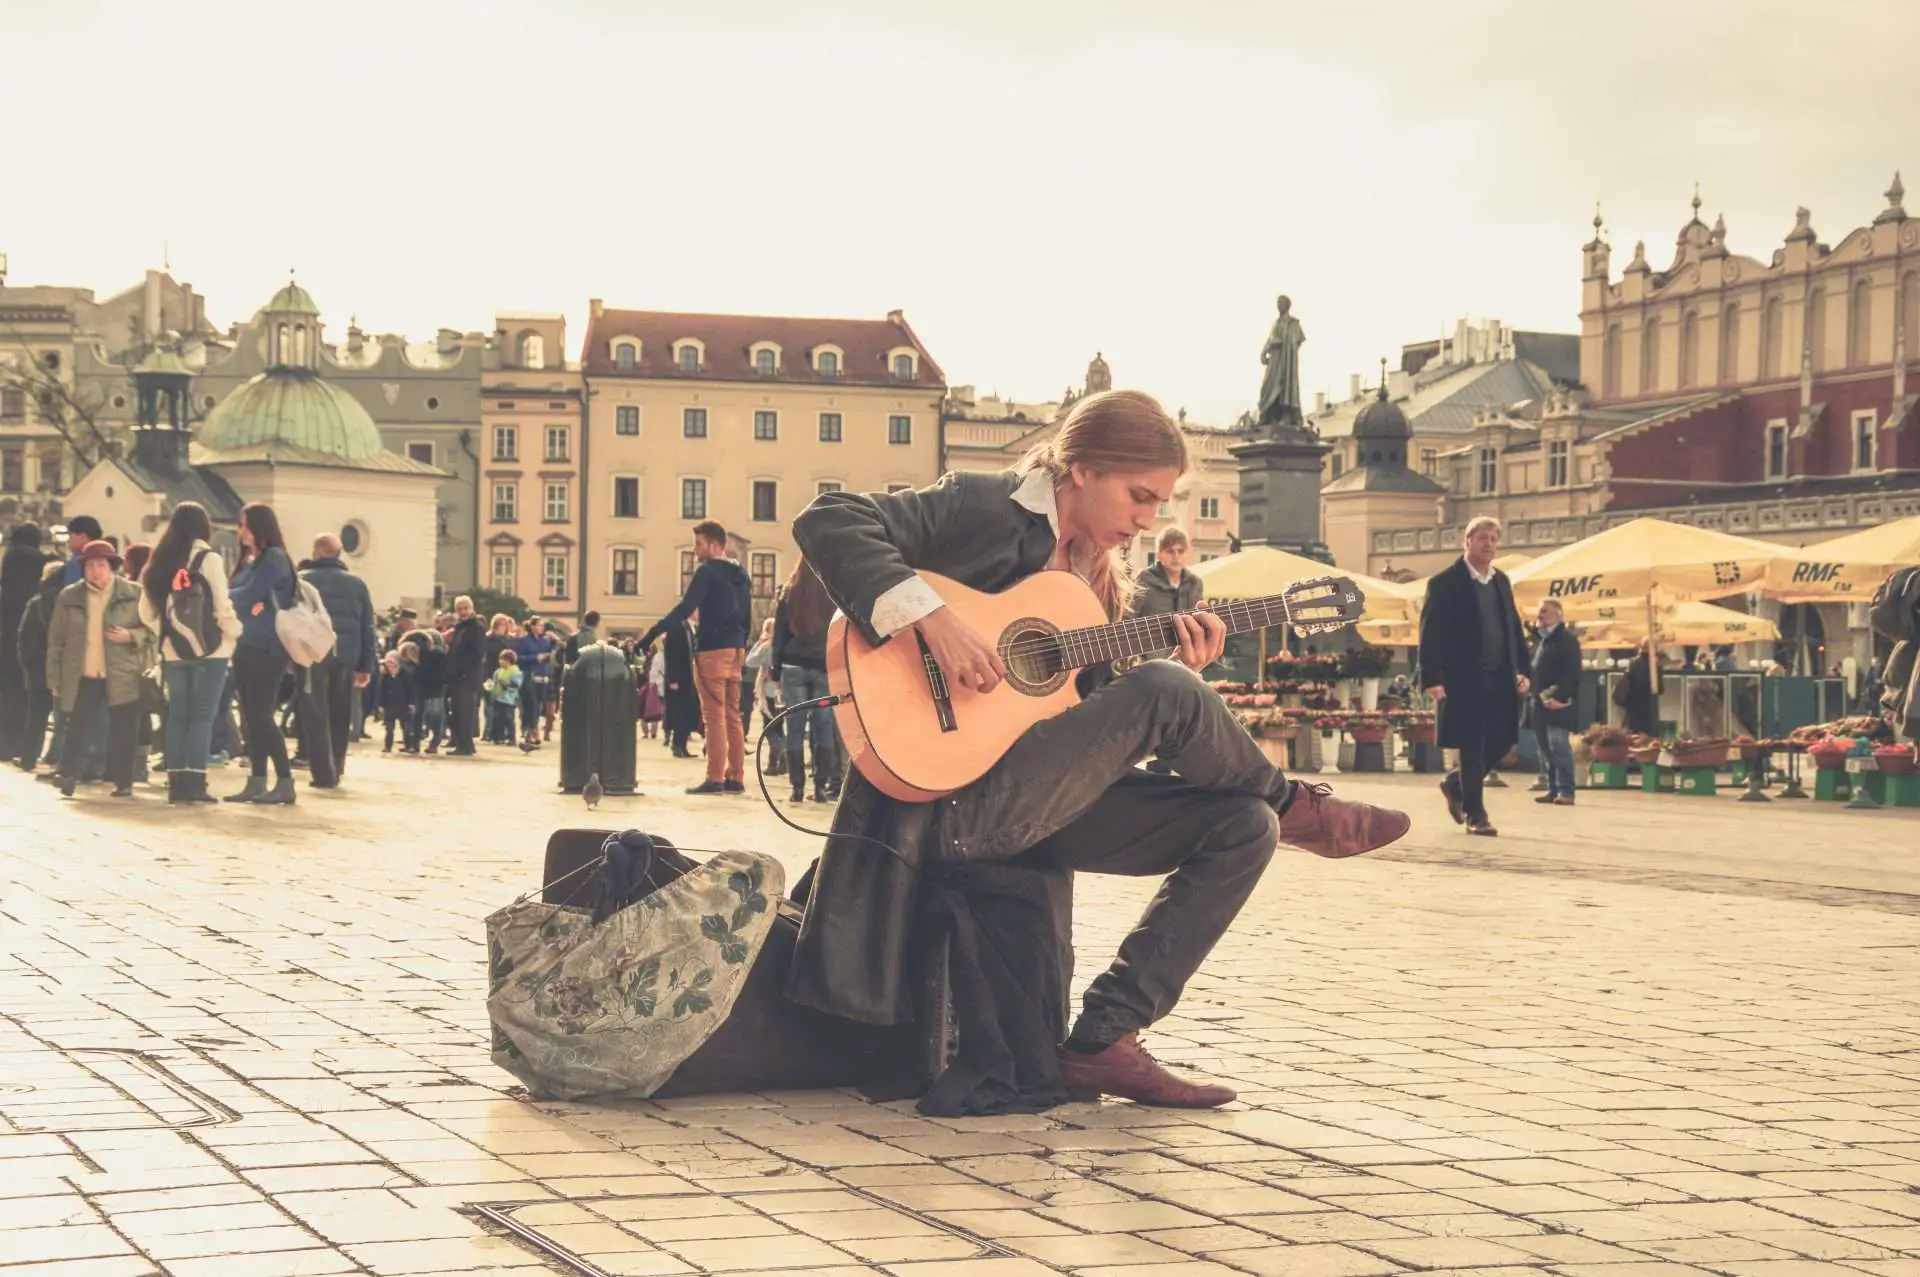 man sitting down at a town square and playing his guitar with people walking by